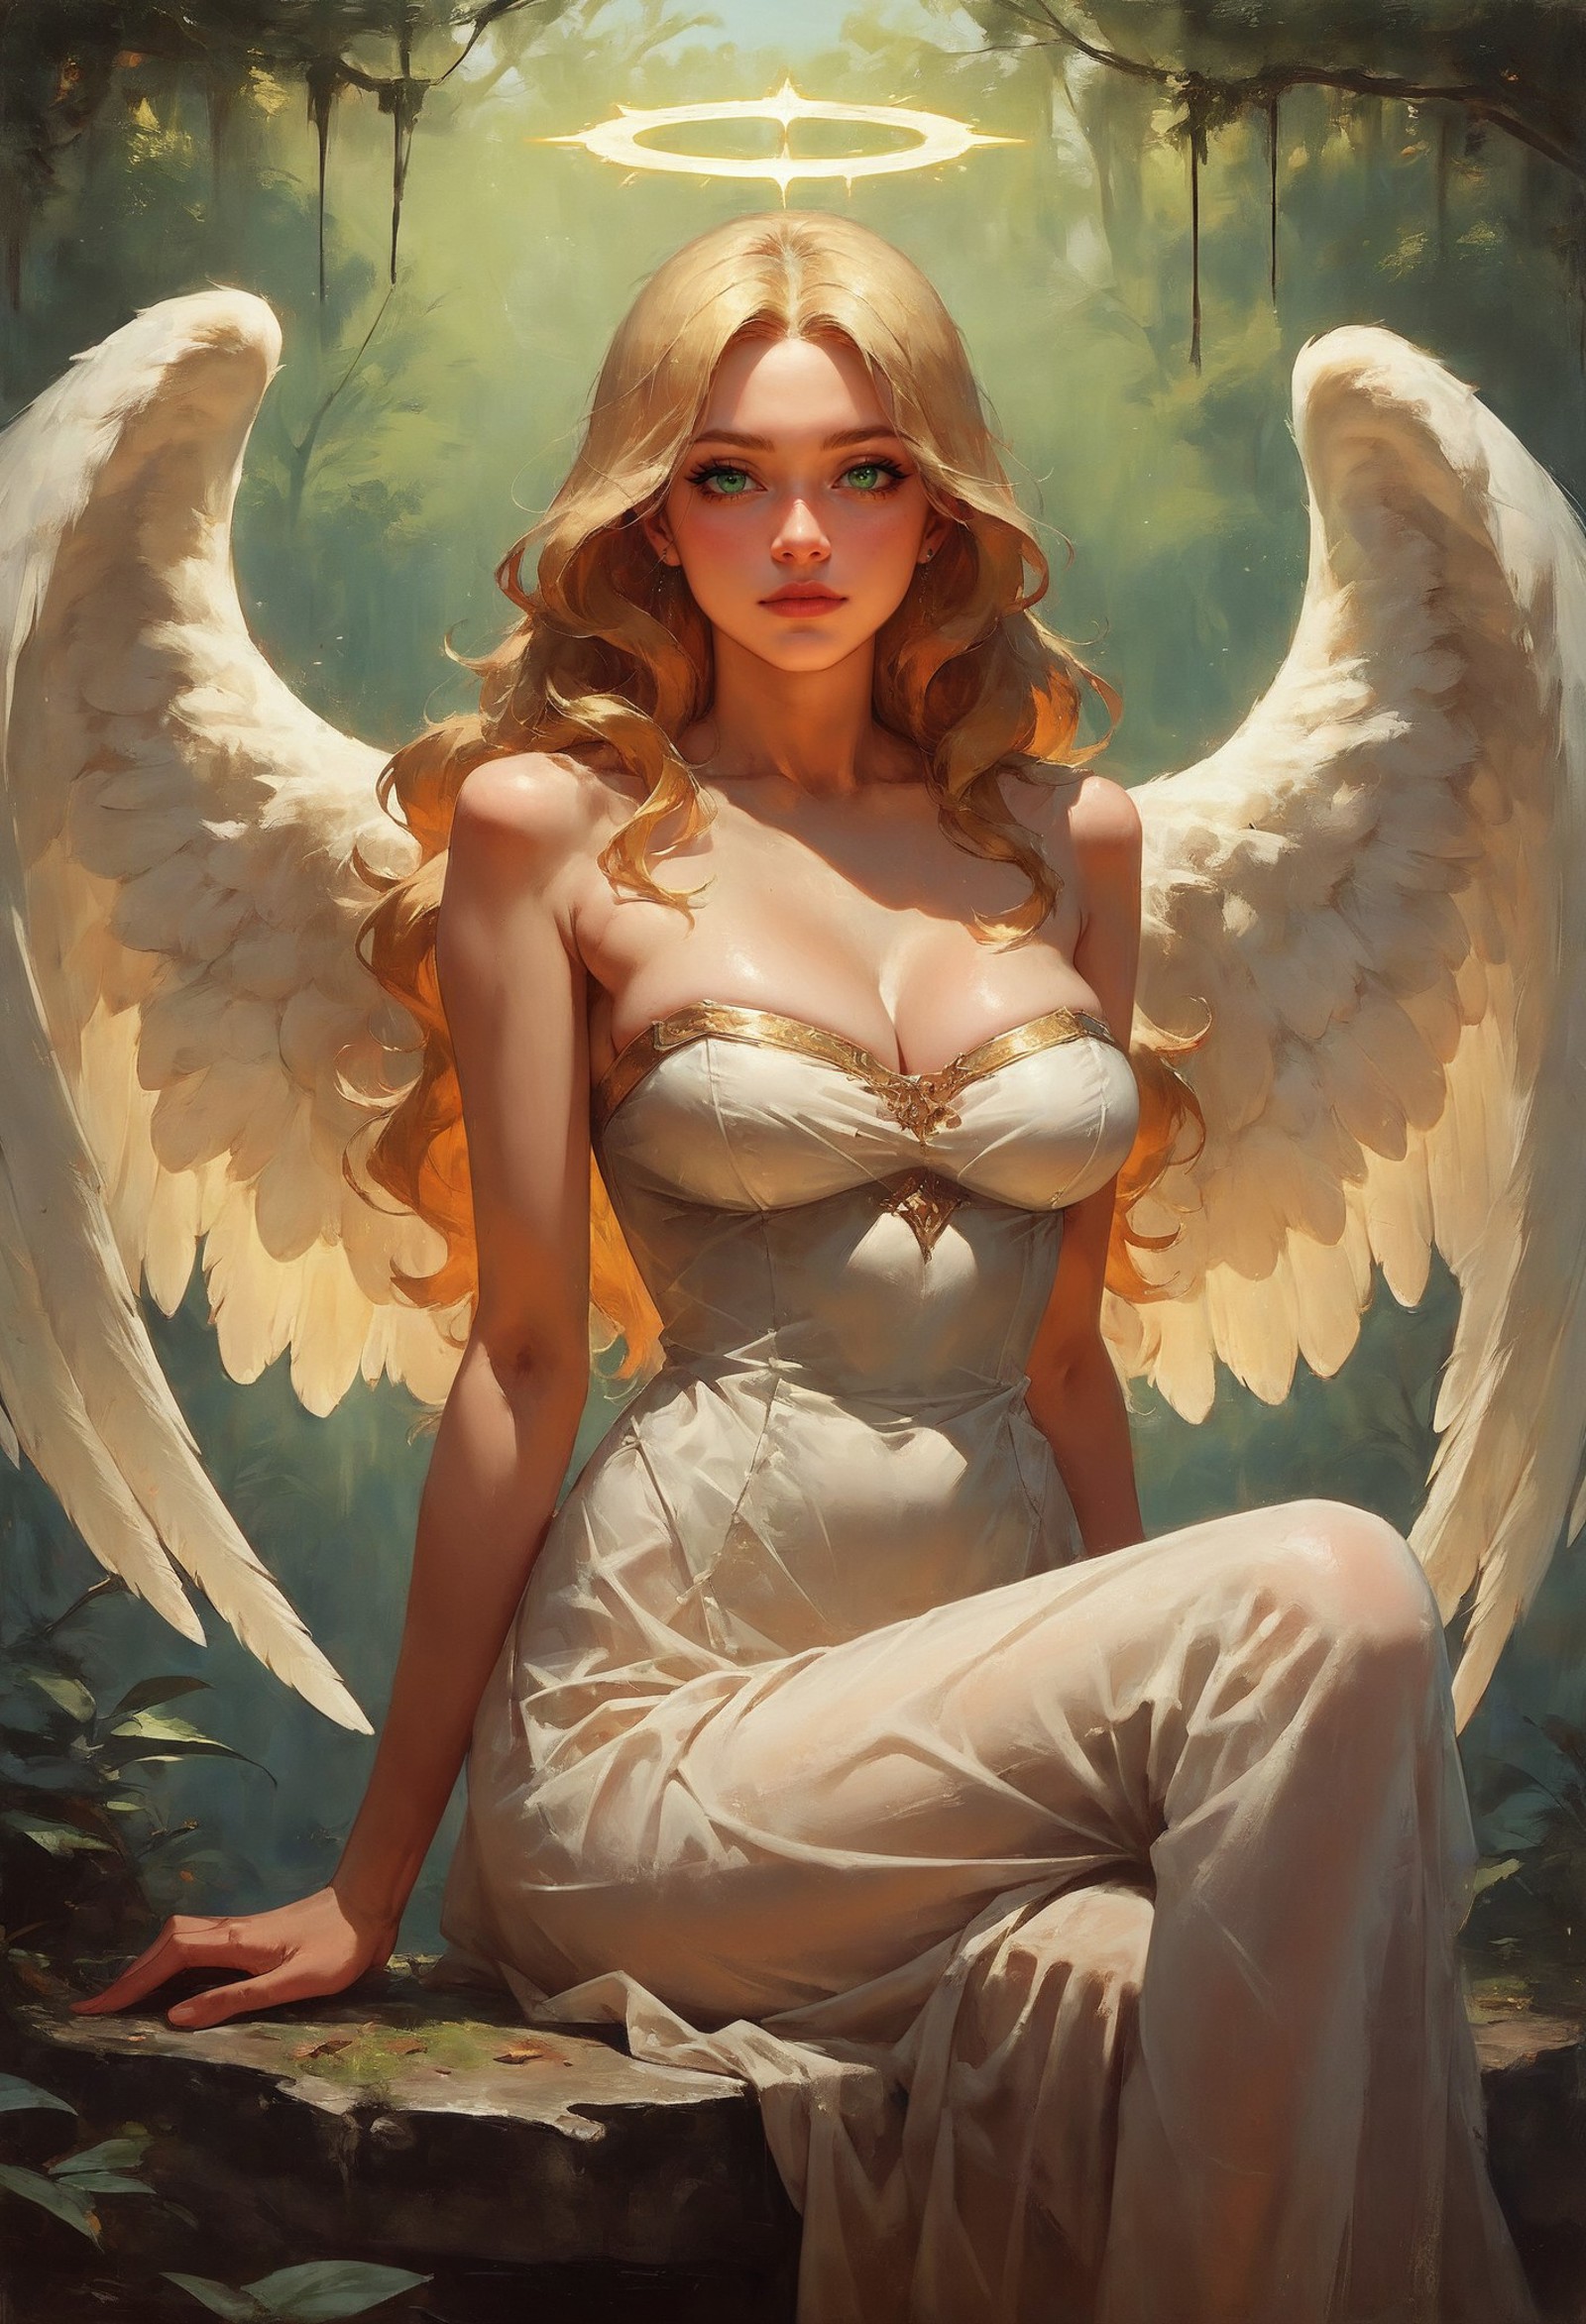 score_9, score_8_up, score_7_up,  1girl angel with 2 large angel wings and a halo, perfect curves, wearing a white dress, ...